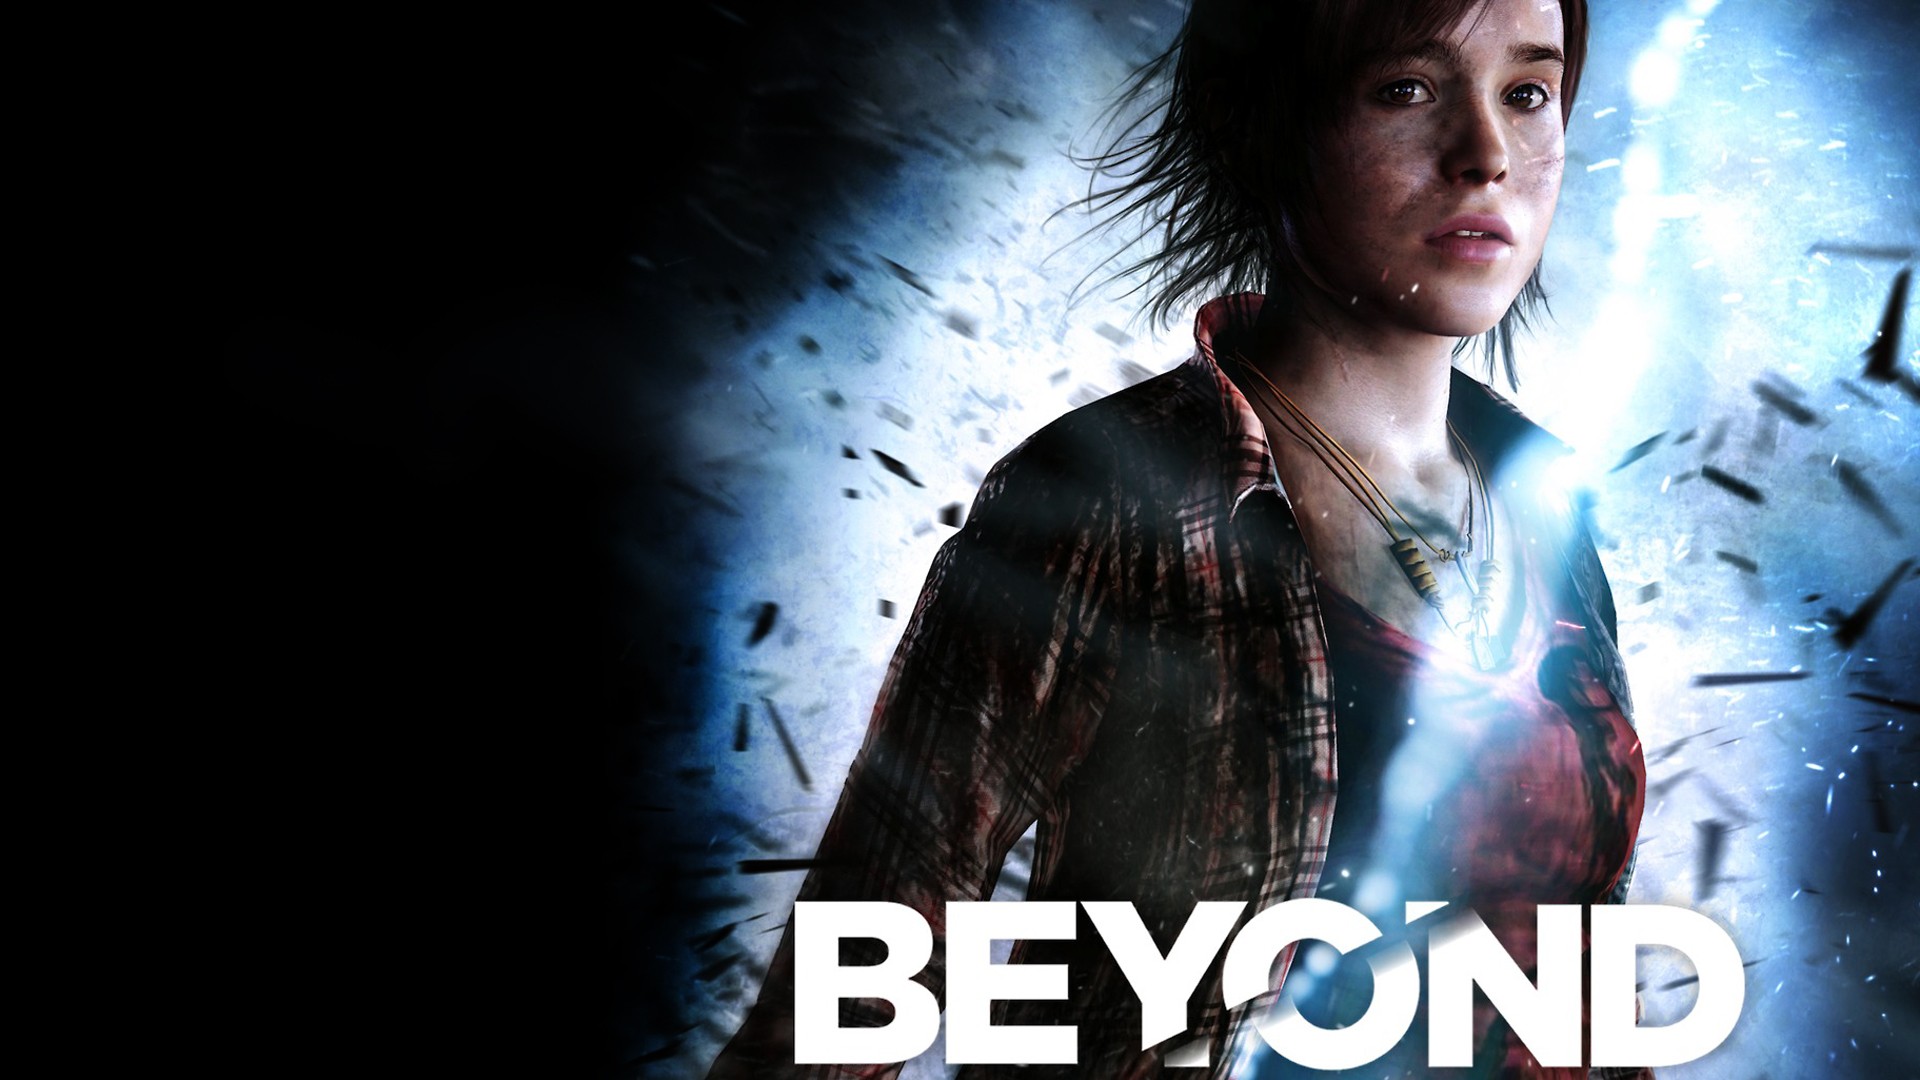 beyond two souls wallpaper,movie,font,poster,fictional character,darkness